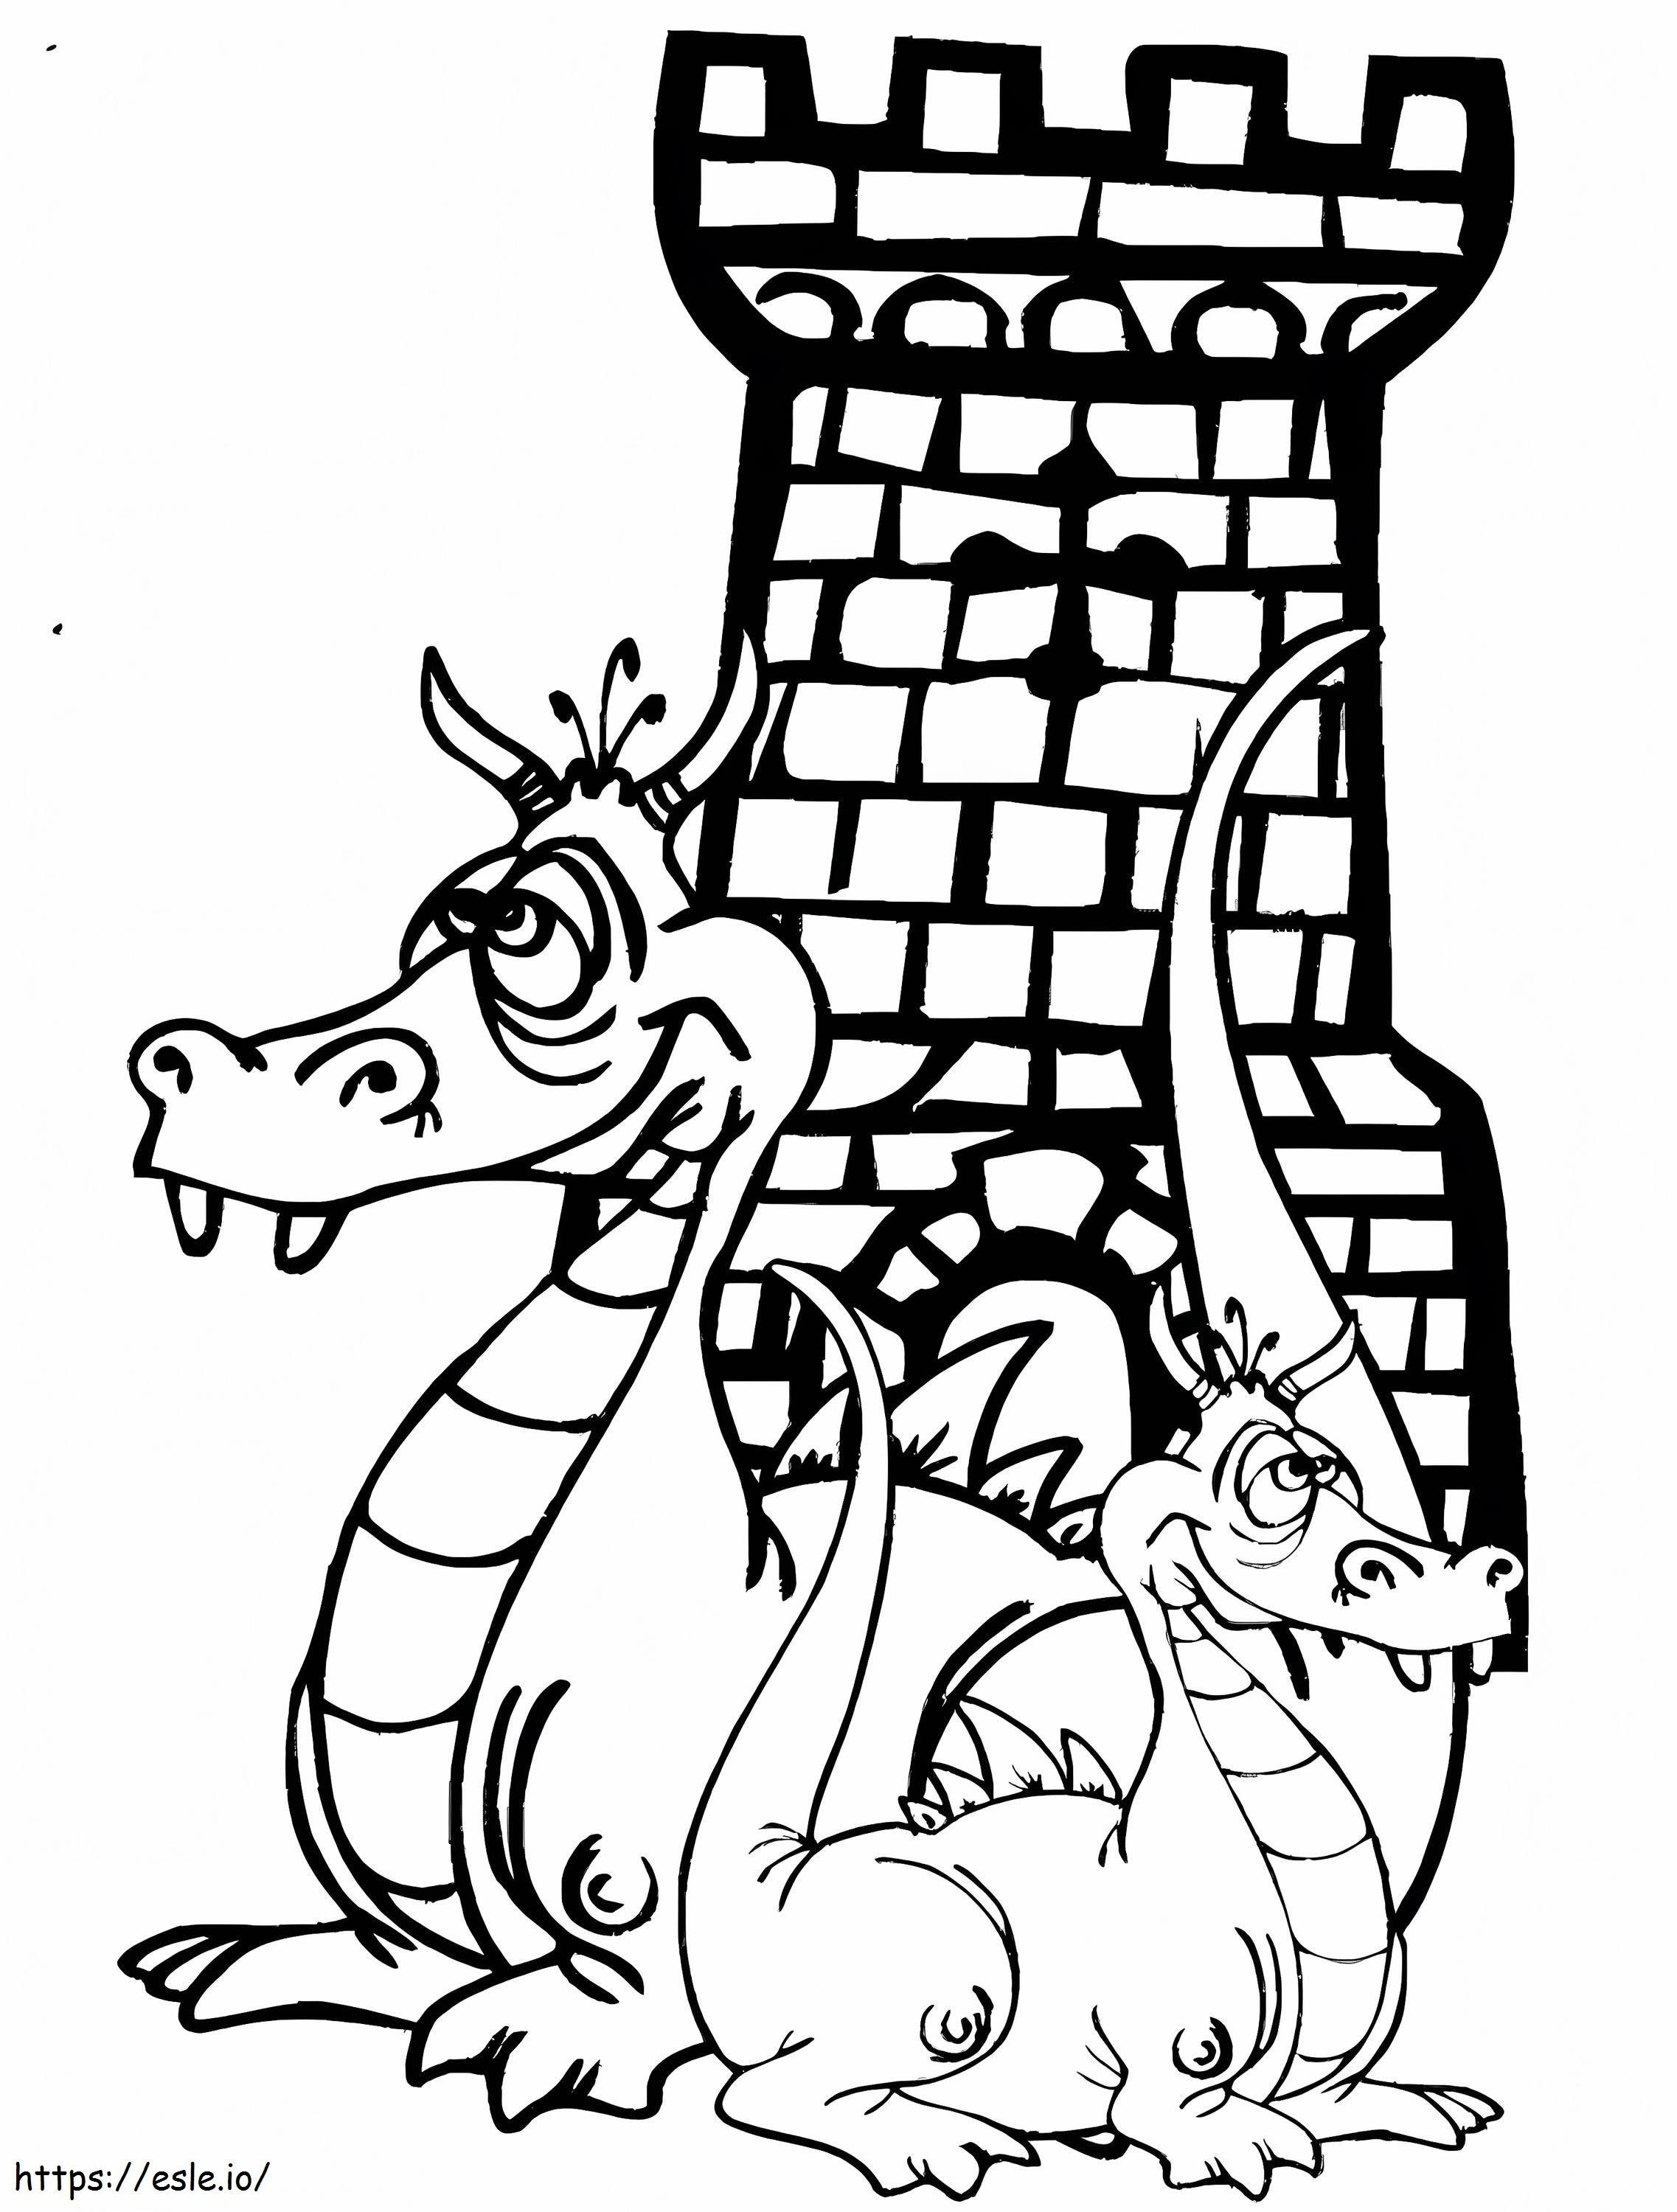 Two Funny Dragons coloring page